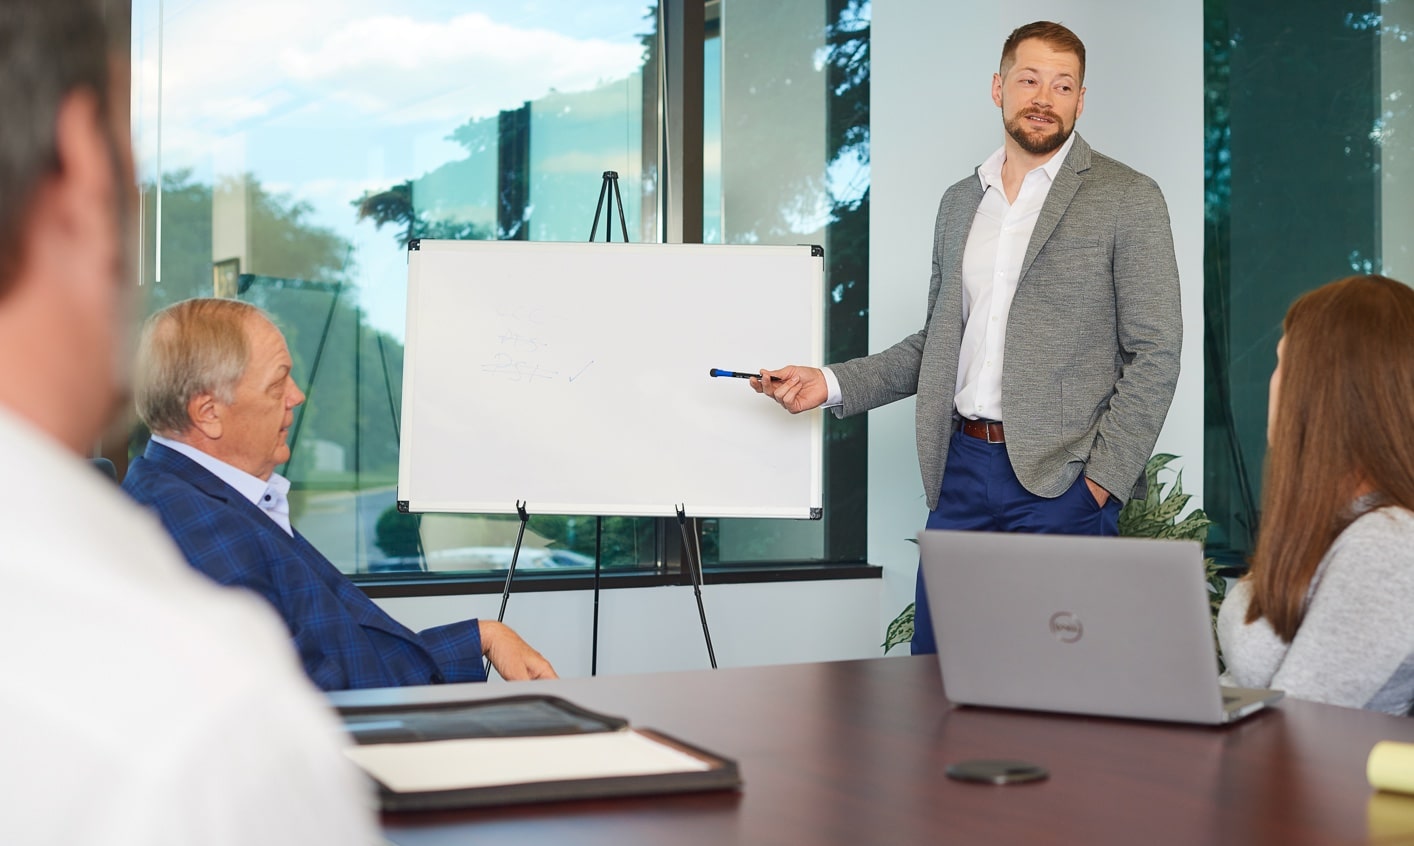 Young professional in business casual attire using a marker to point at whiteboard in boardroom